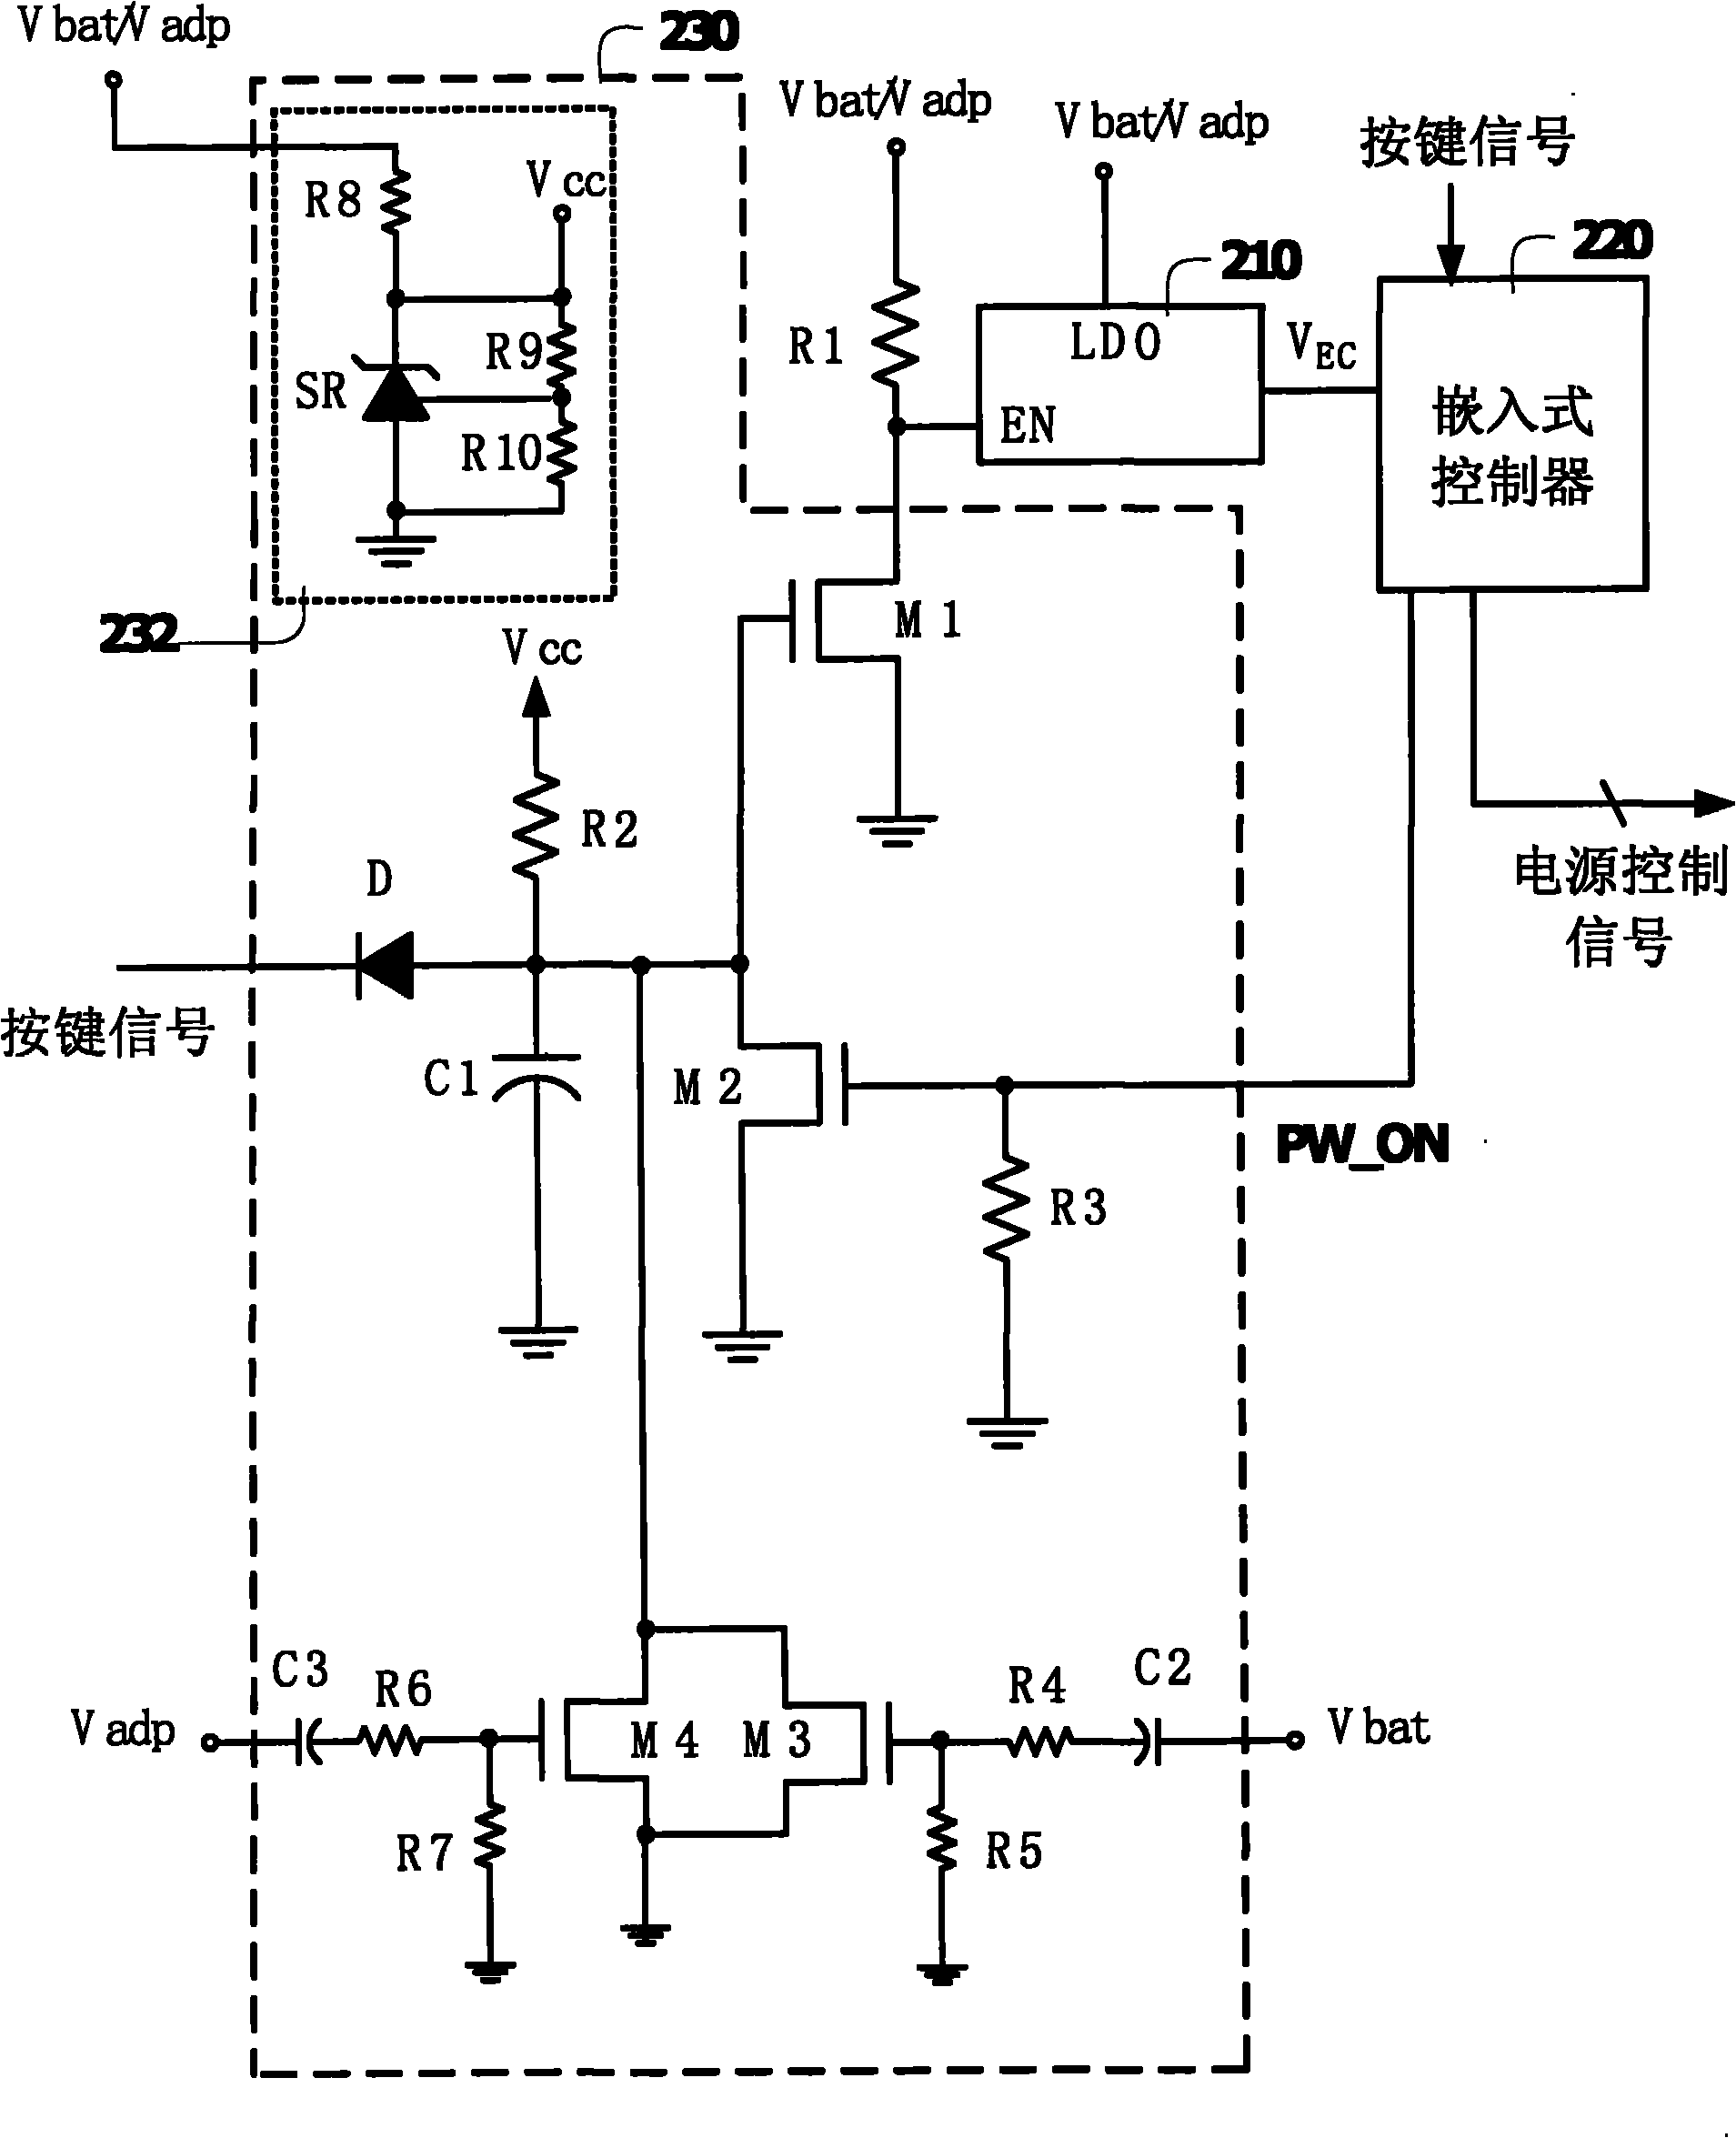 Power supply control circuit and control method of computer system